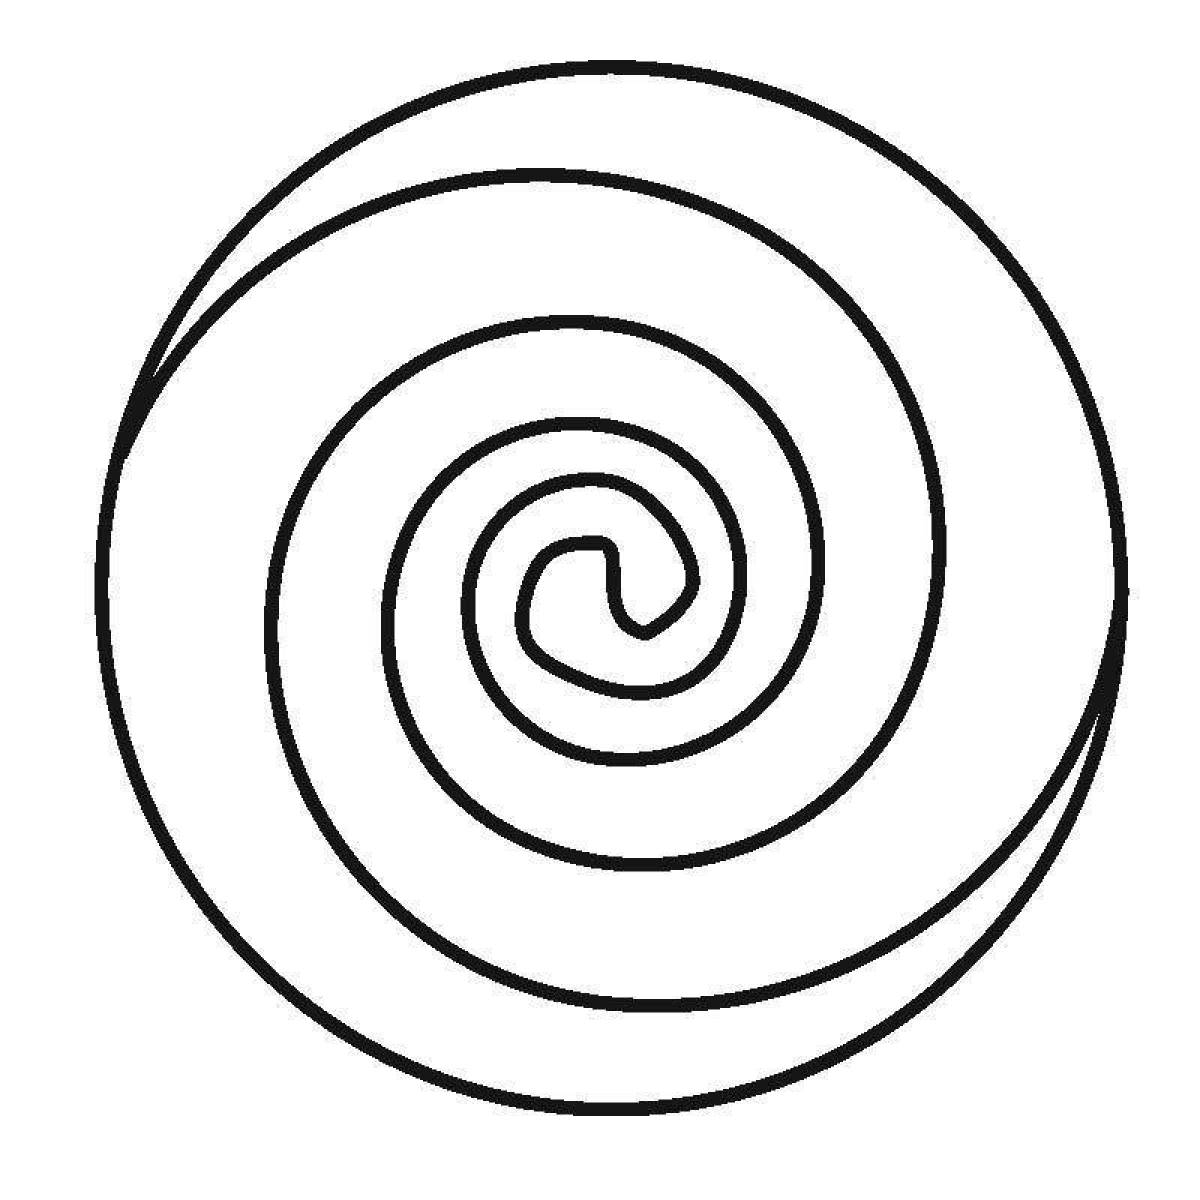 Coloring page delicate spiral pattern